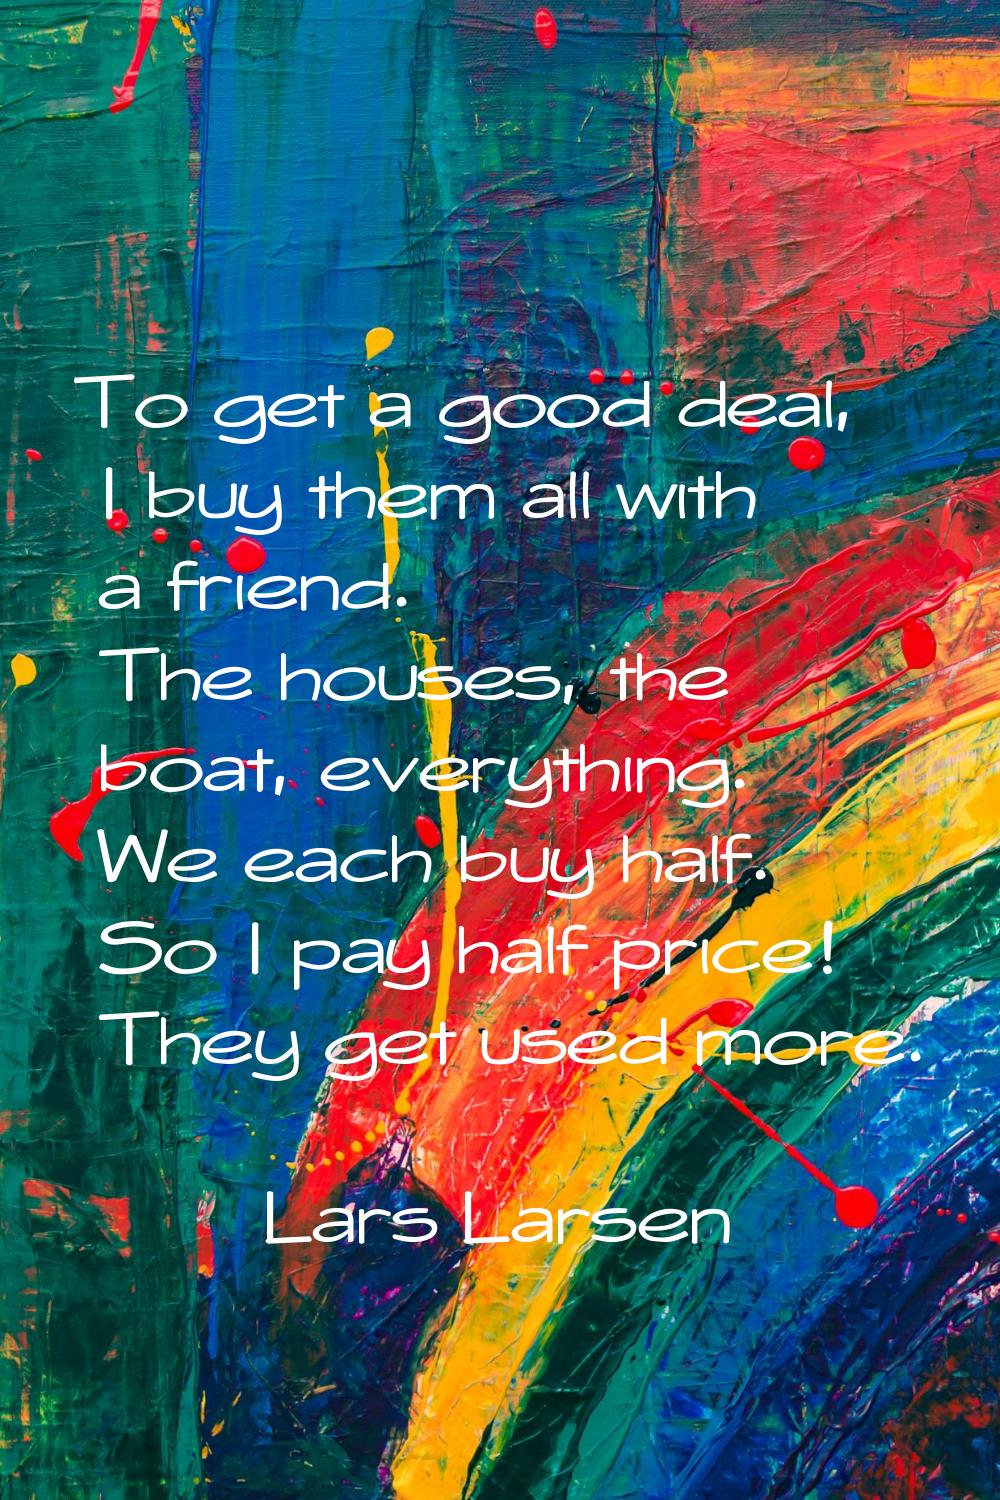 To get a good deal, I buy them all with a friend. The houses, the boat, everything. We each buy hal